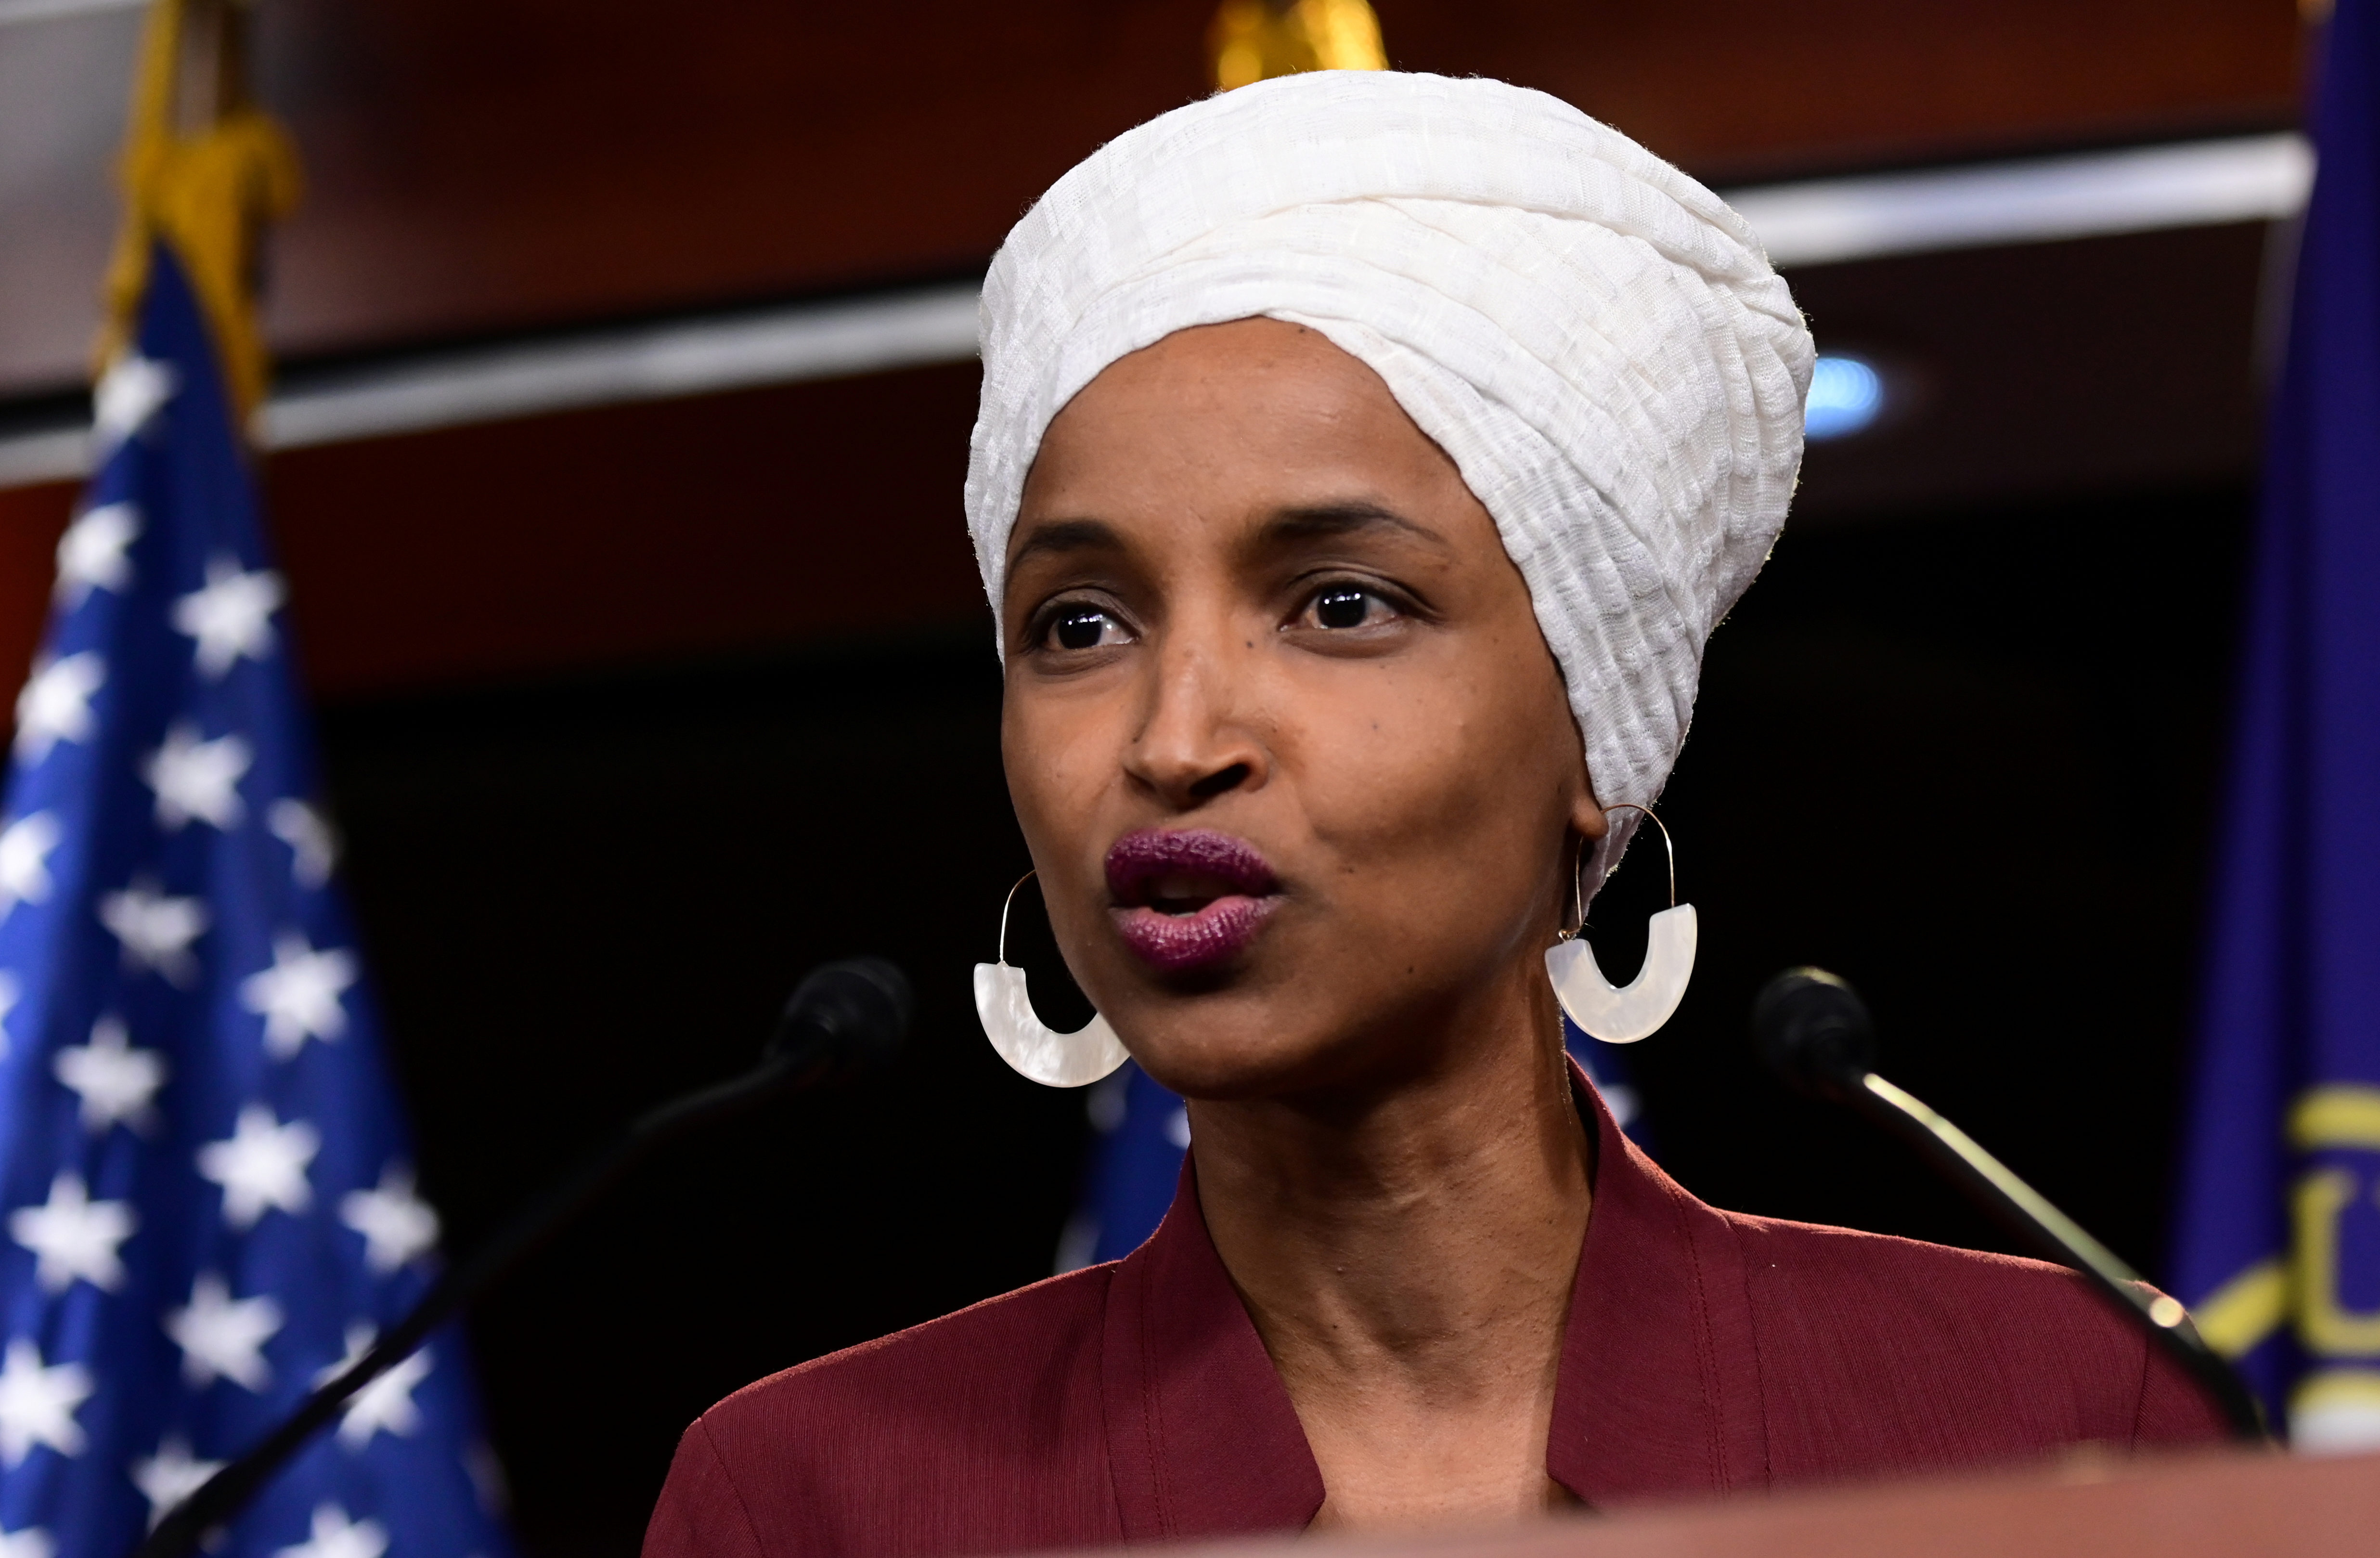 U.S. Rep Ilhan Omar (D-MN) speaks at a news conference after Democrats in the U.S. Congress moved to formally condemn President Donald Trump's attacks on the four minority congresswomen on Capitol Hill in Washington, U.S., July 15, 2019. REUTERS/Erin Scott